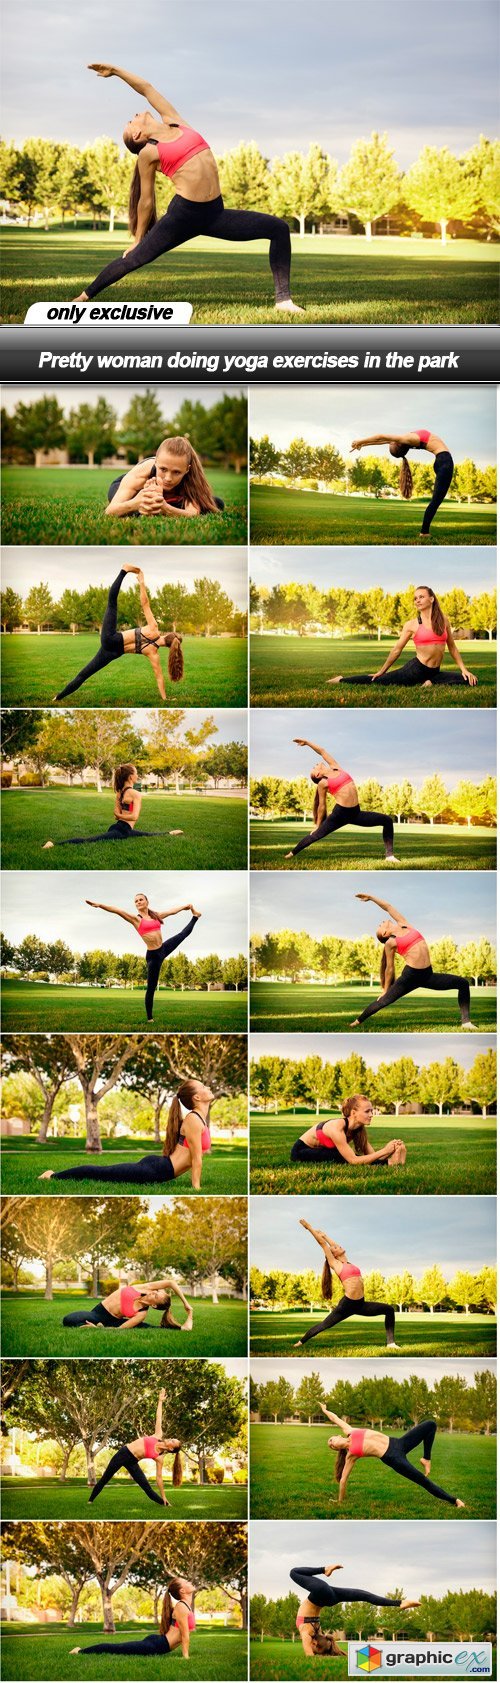 Pretty woman doing yoga exercises in the park - 16 UHQ JPEG